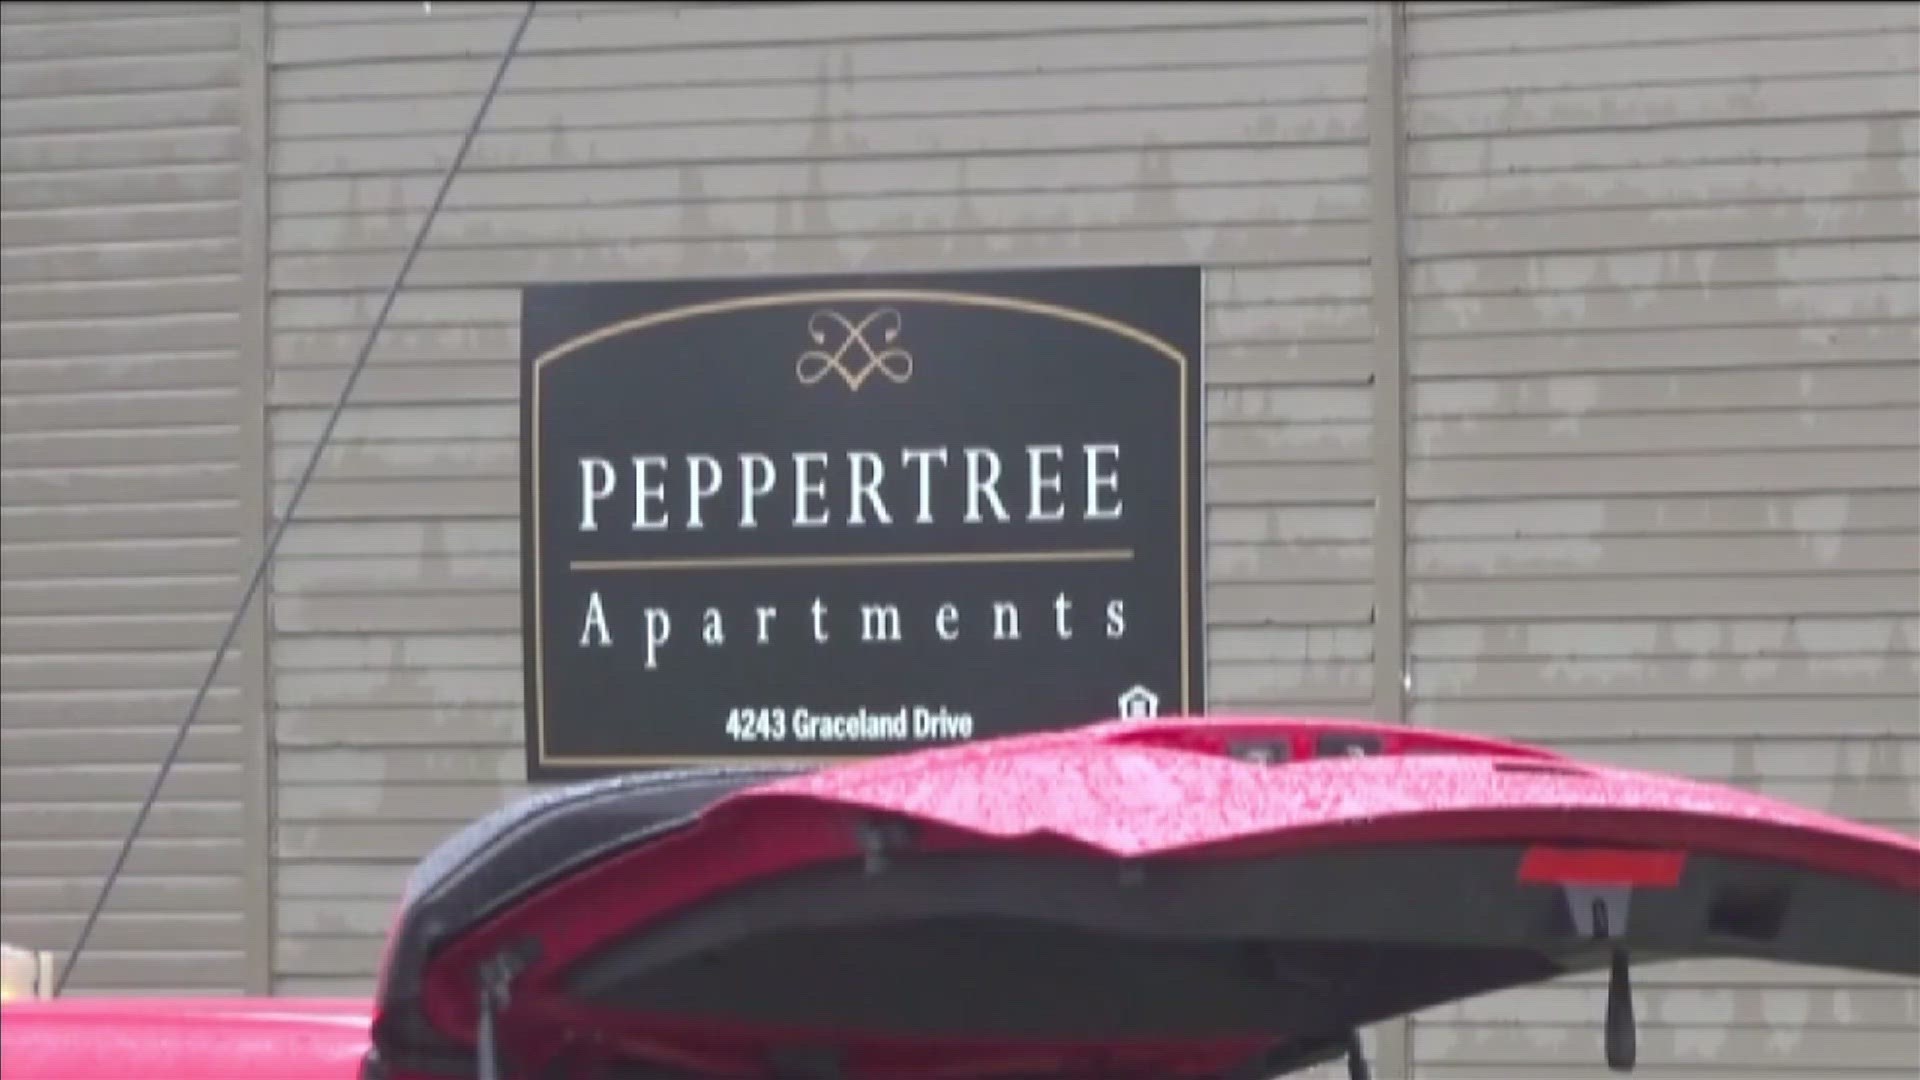 Months after the U.S. Department of Housing and Urban Development cut ties with Peppertree Apartments in Whitehaven, many remain in limbo.